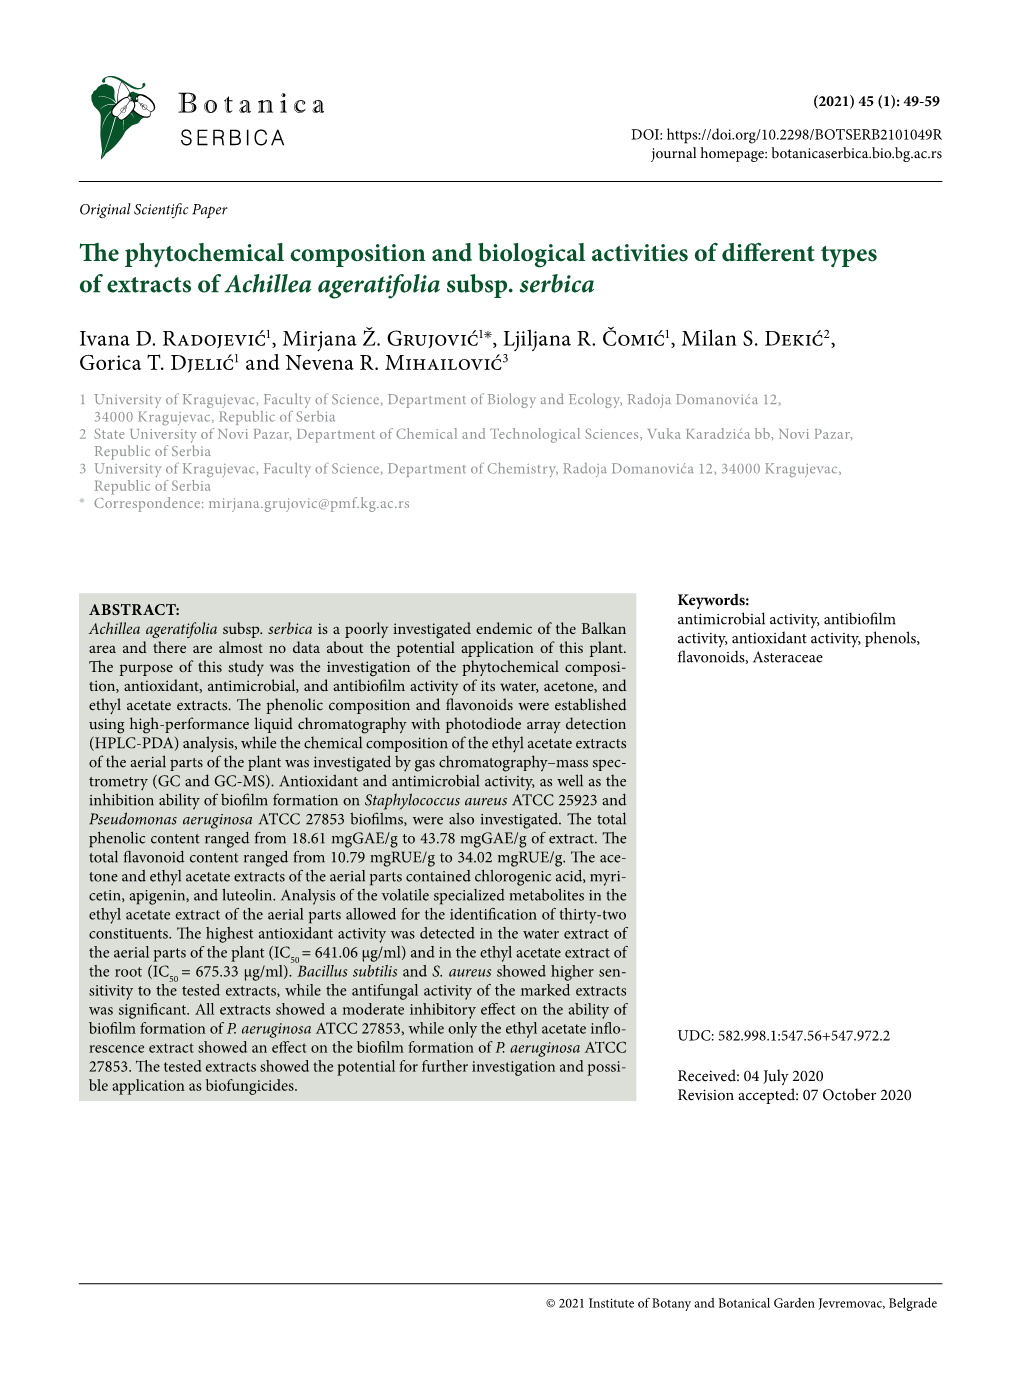 The Phytochemical Composition and Biological Activities of Different Types of Extracts of Achillea Ageratifolia Subsp